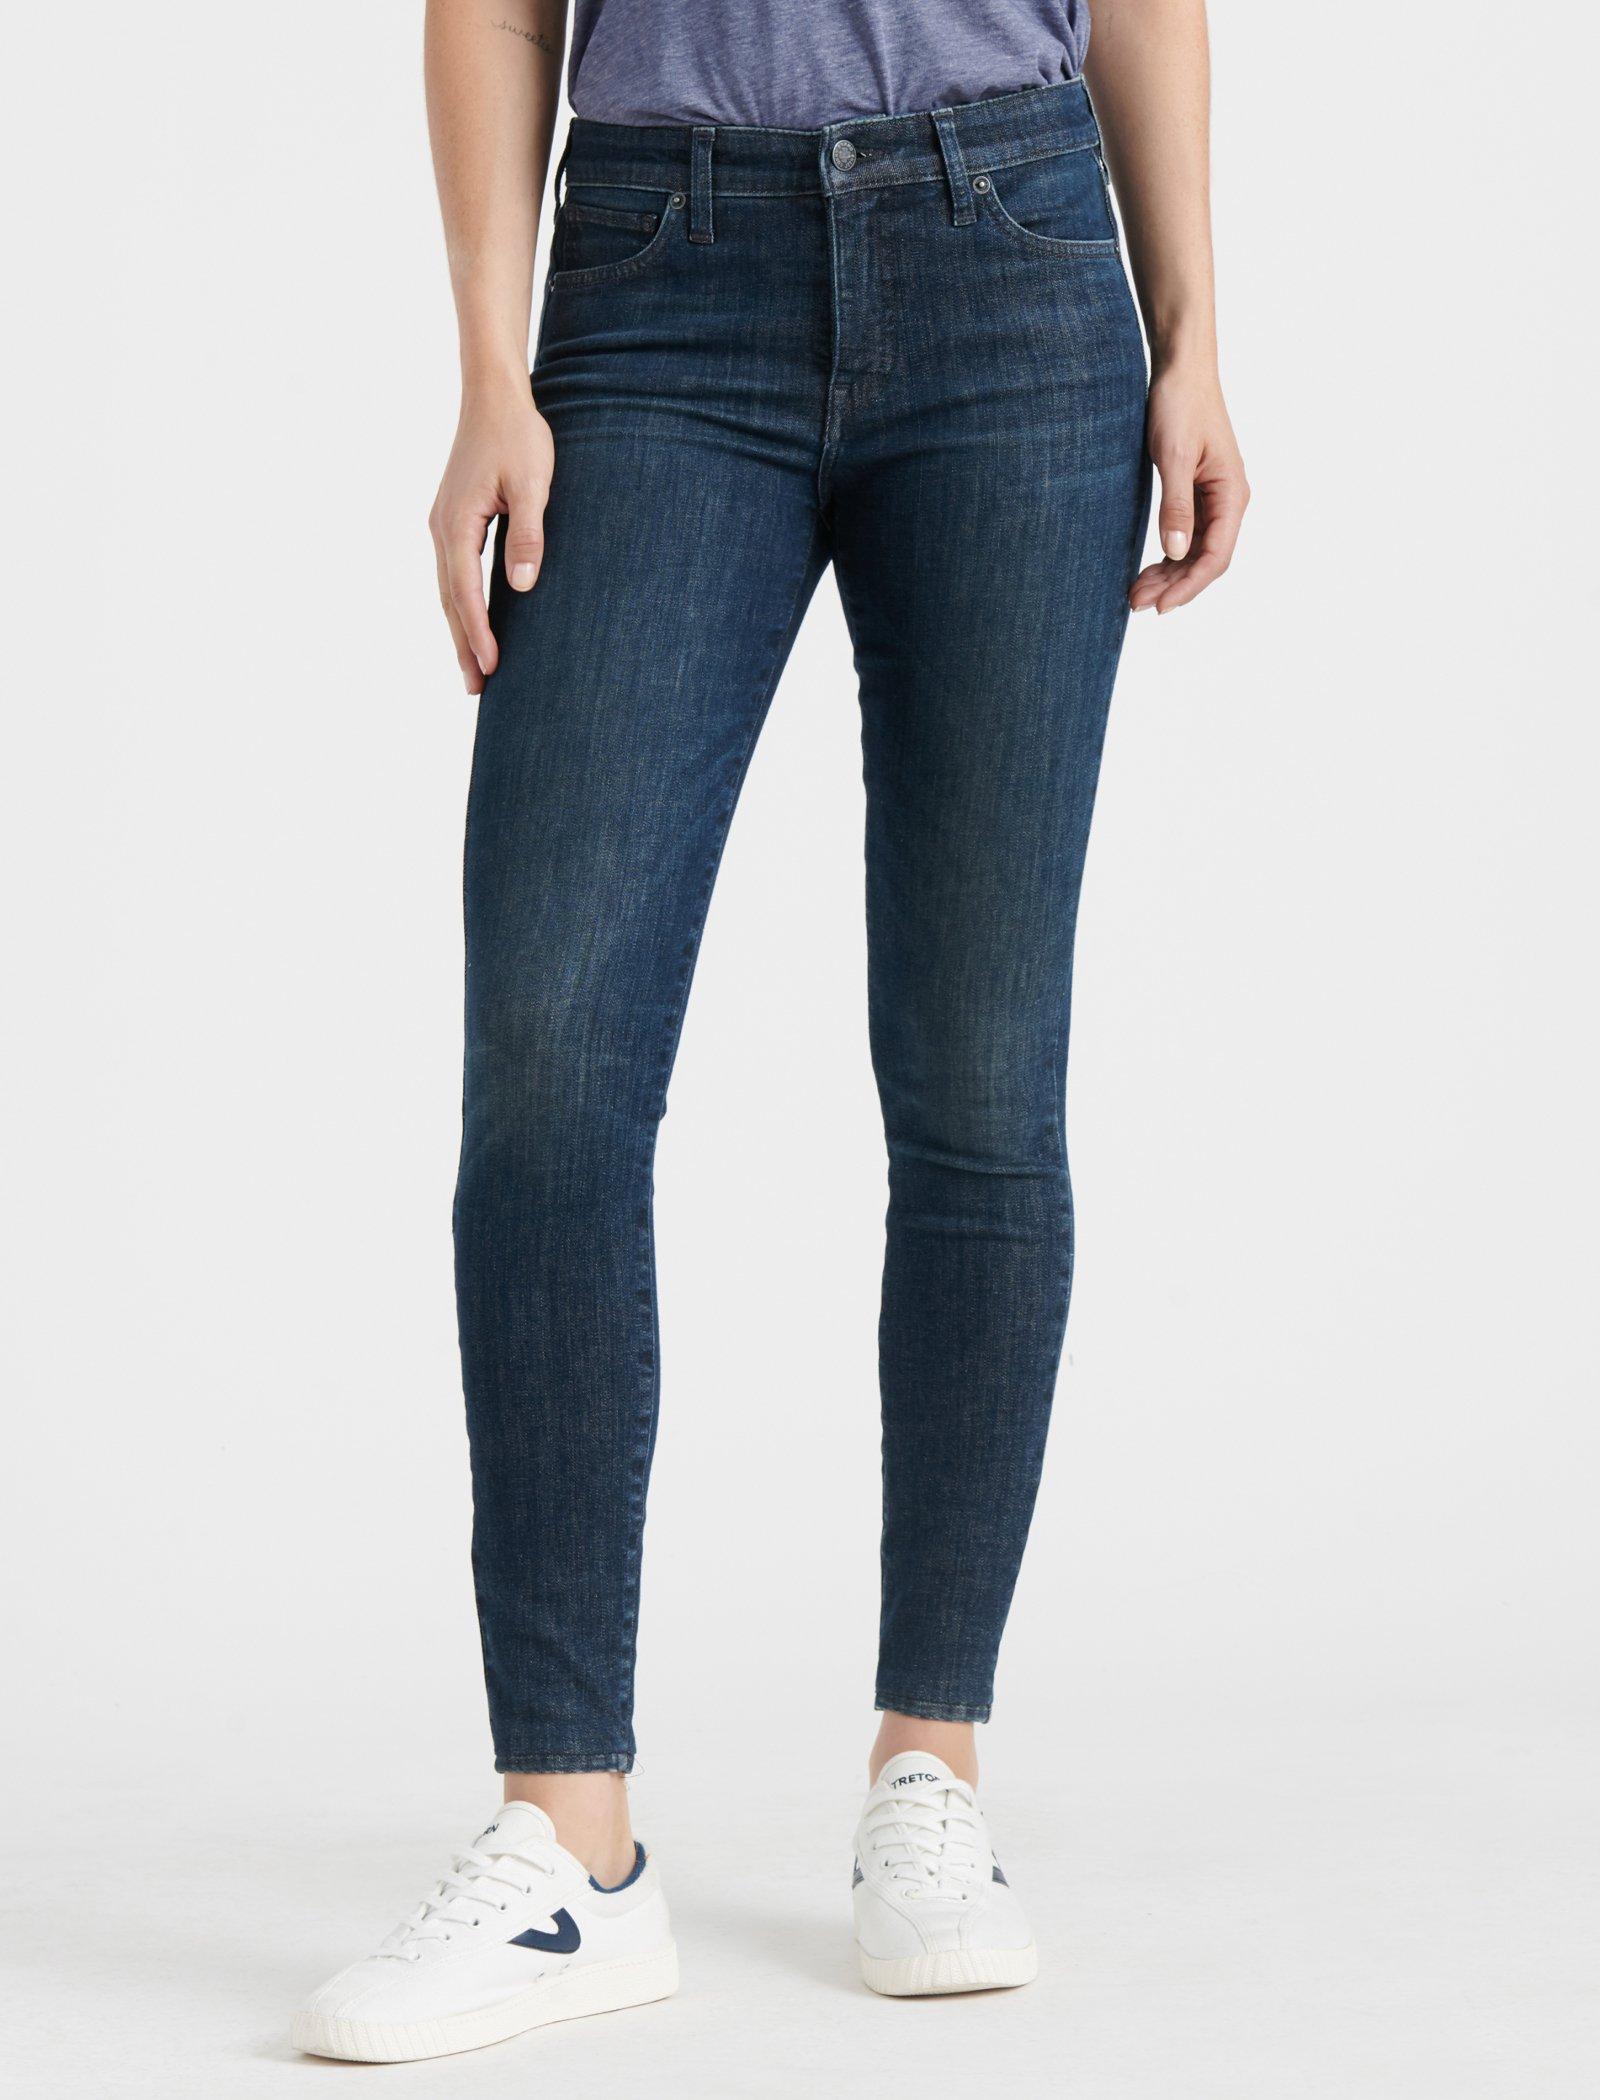 lucky brand jeans fit guide womens